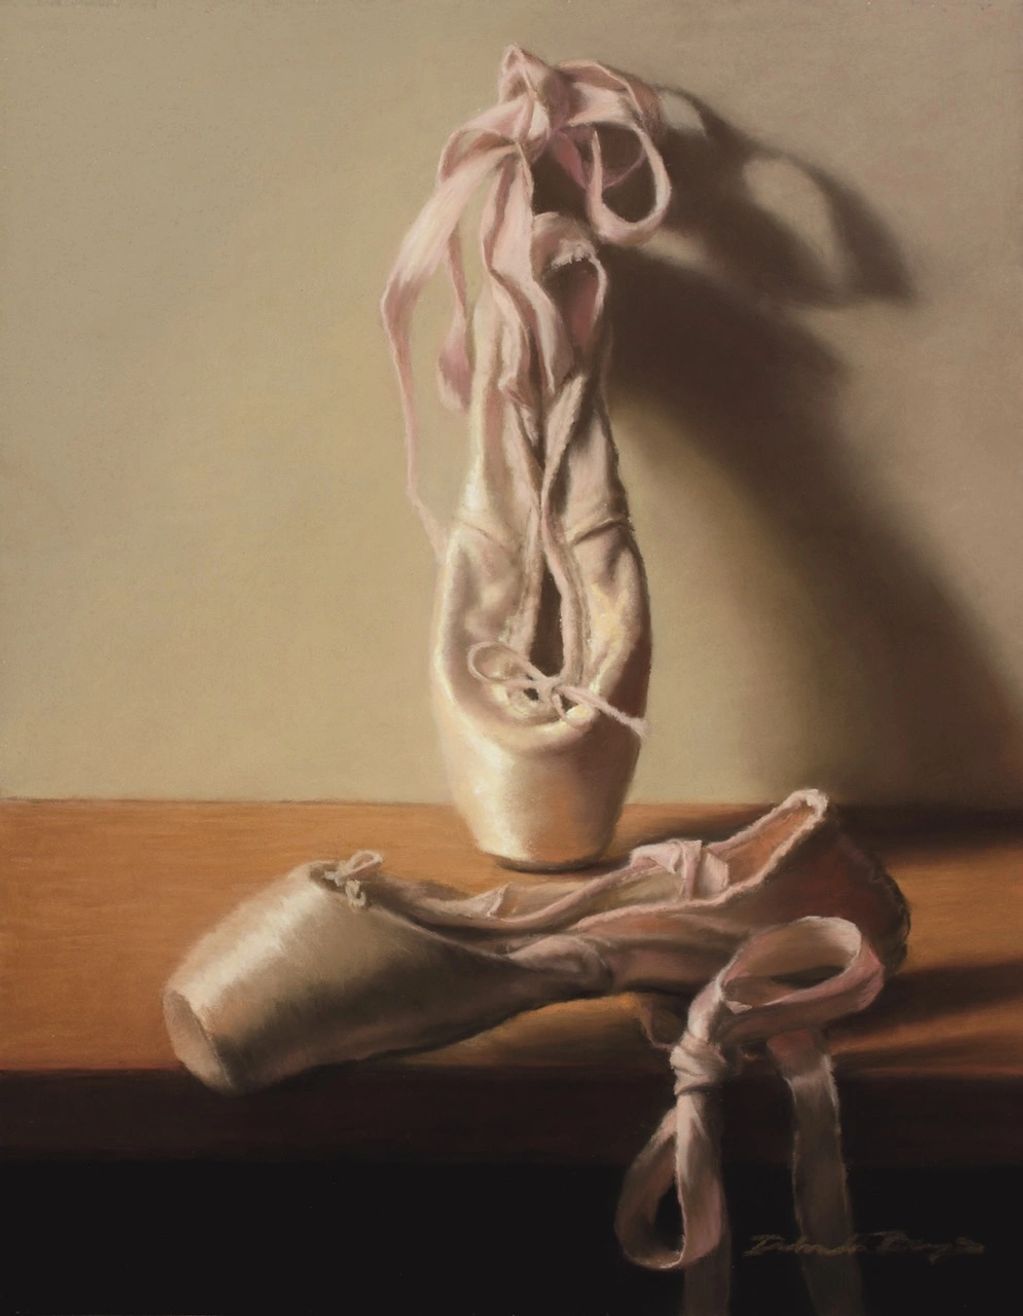 Pastel painting of pink ballet shoes against a light background with cast shadows.